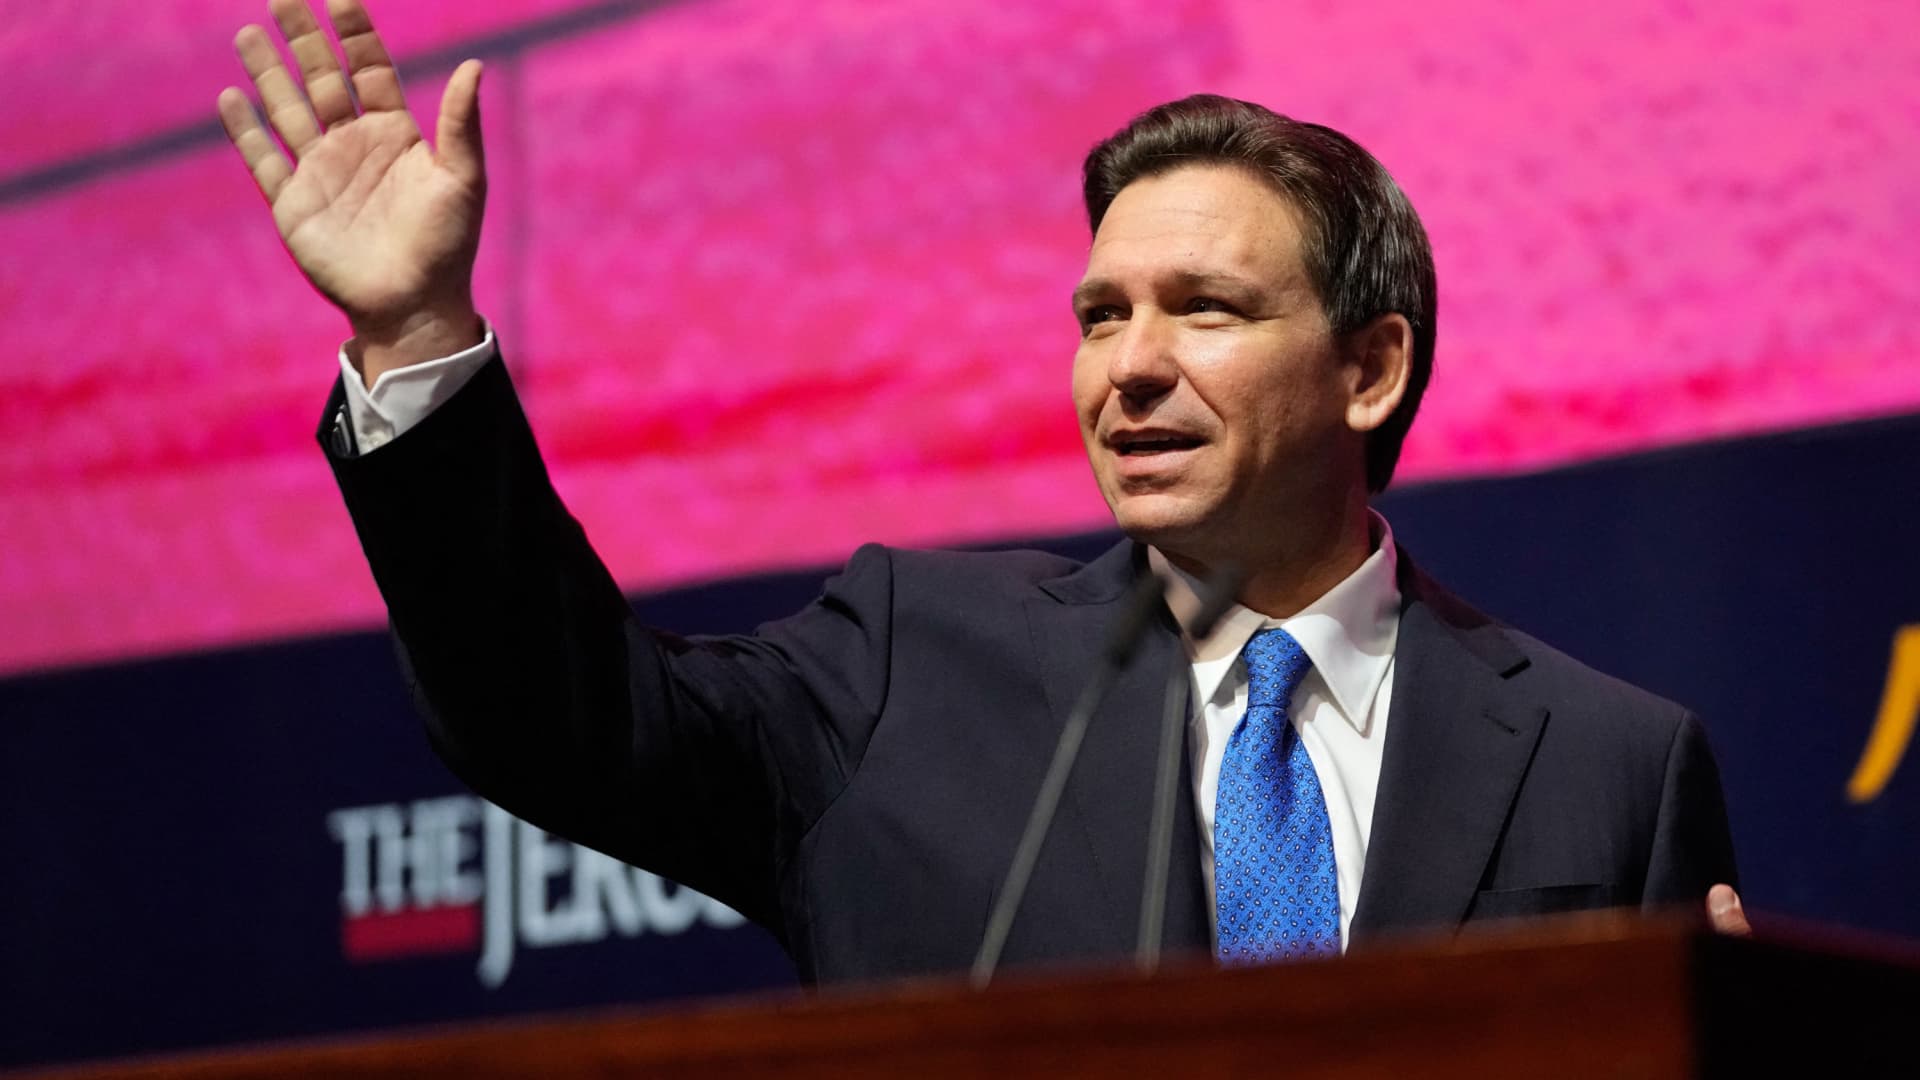 Florida Governor Ron DeSantis' presidential campaign announcement on Twitter Spaces suffers crashes, feedback glitches, and audio failures